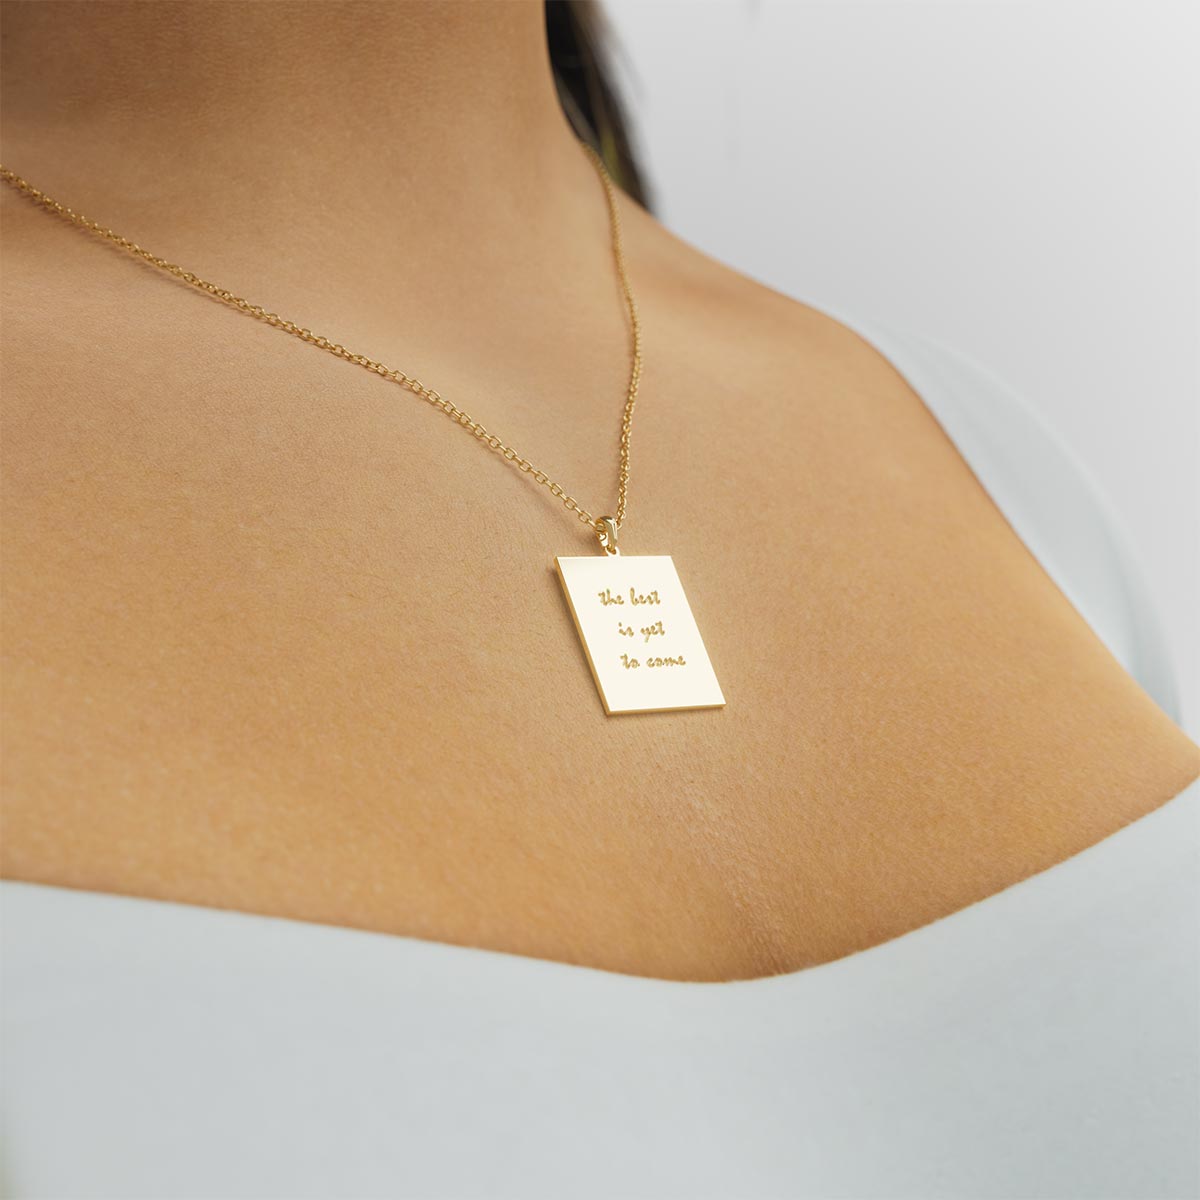 Personalized Rectangular Necklace with Engraving